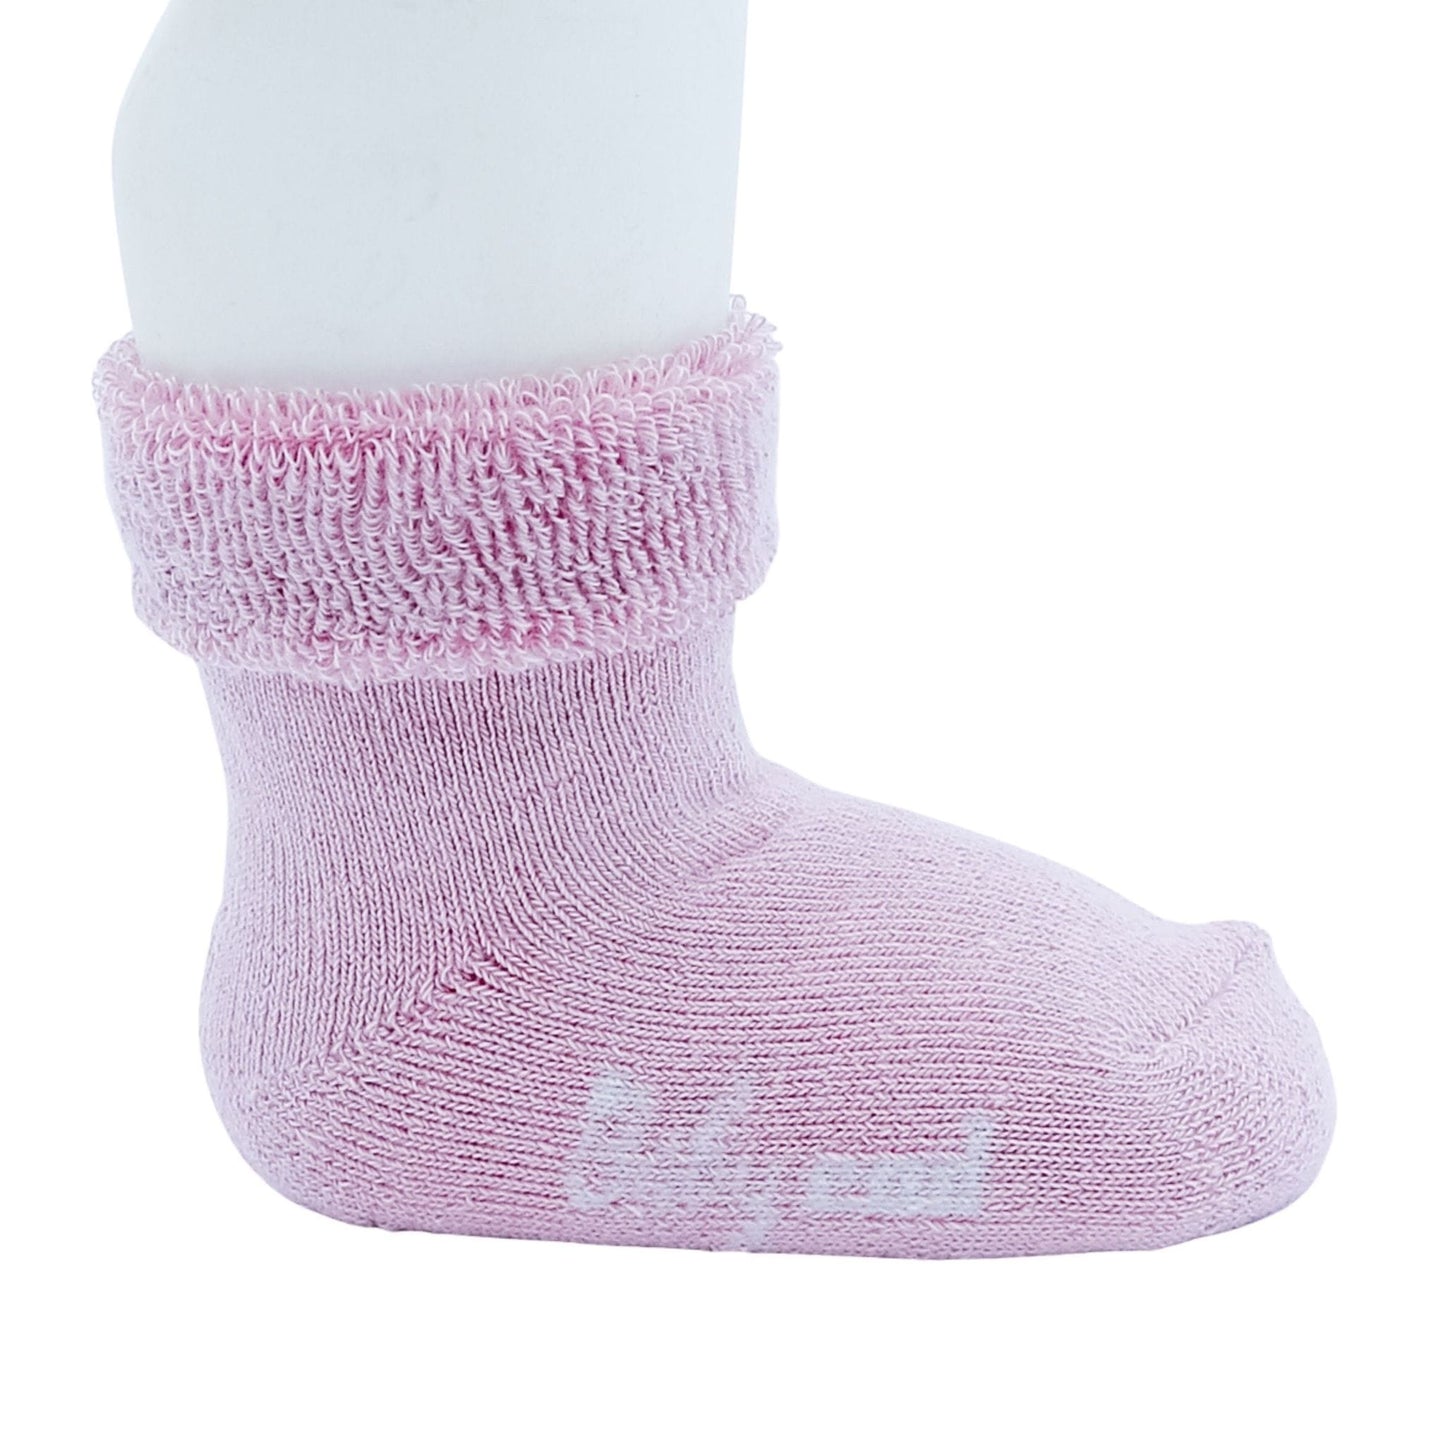 Condor Socks Terry CND Bootie Socks with Folded Cuff - Pale Pink (Rescues)